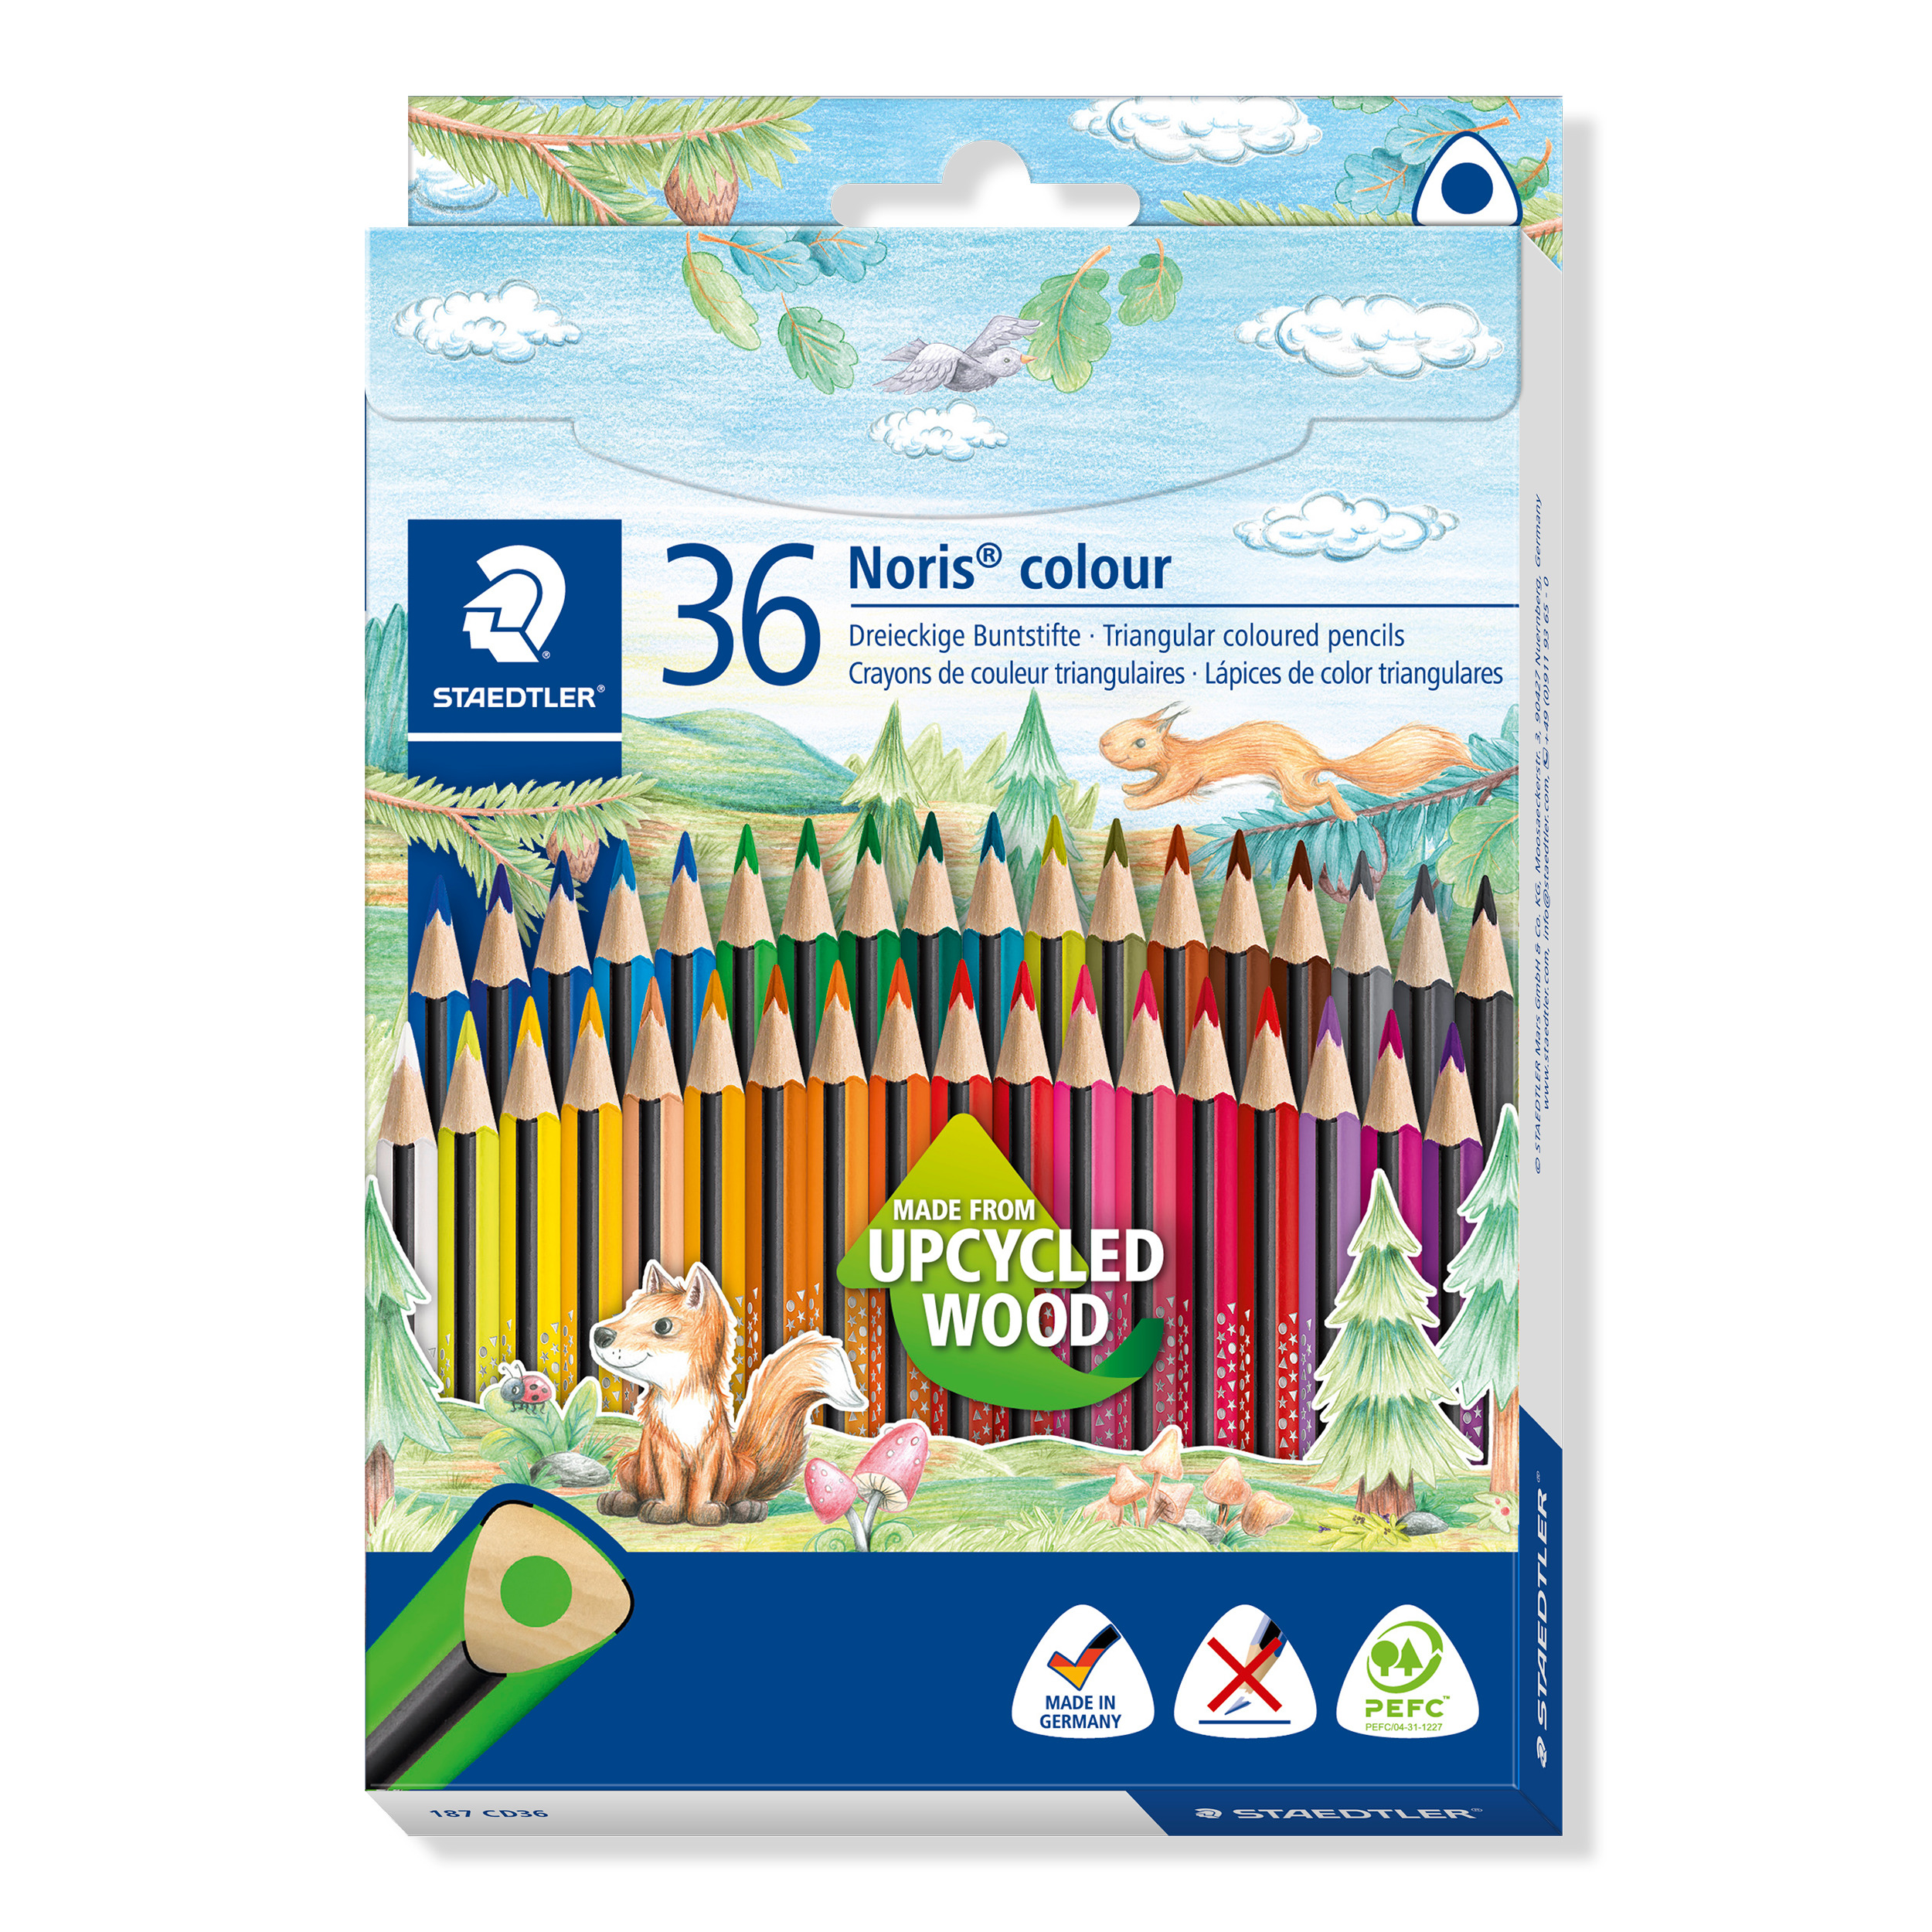 STAEDTLER Crayons couleur Noris 187CD3603 upcycled Wood 36 pcs.